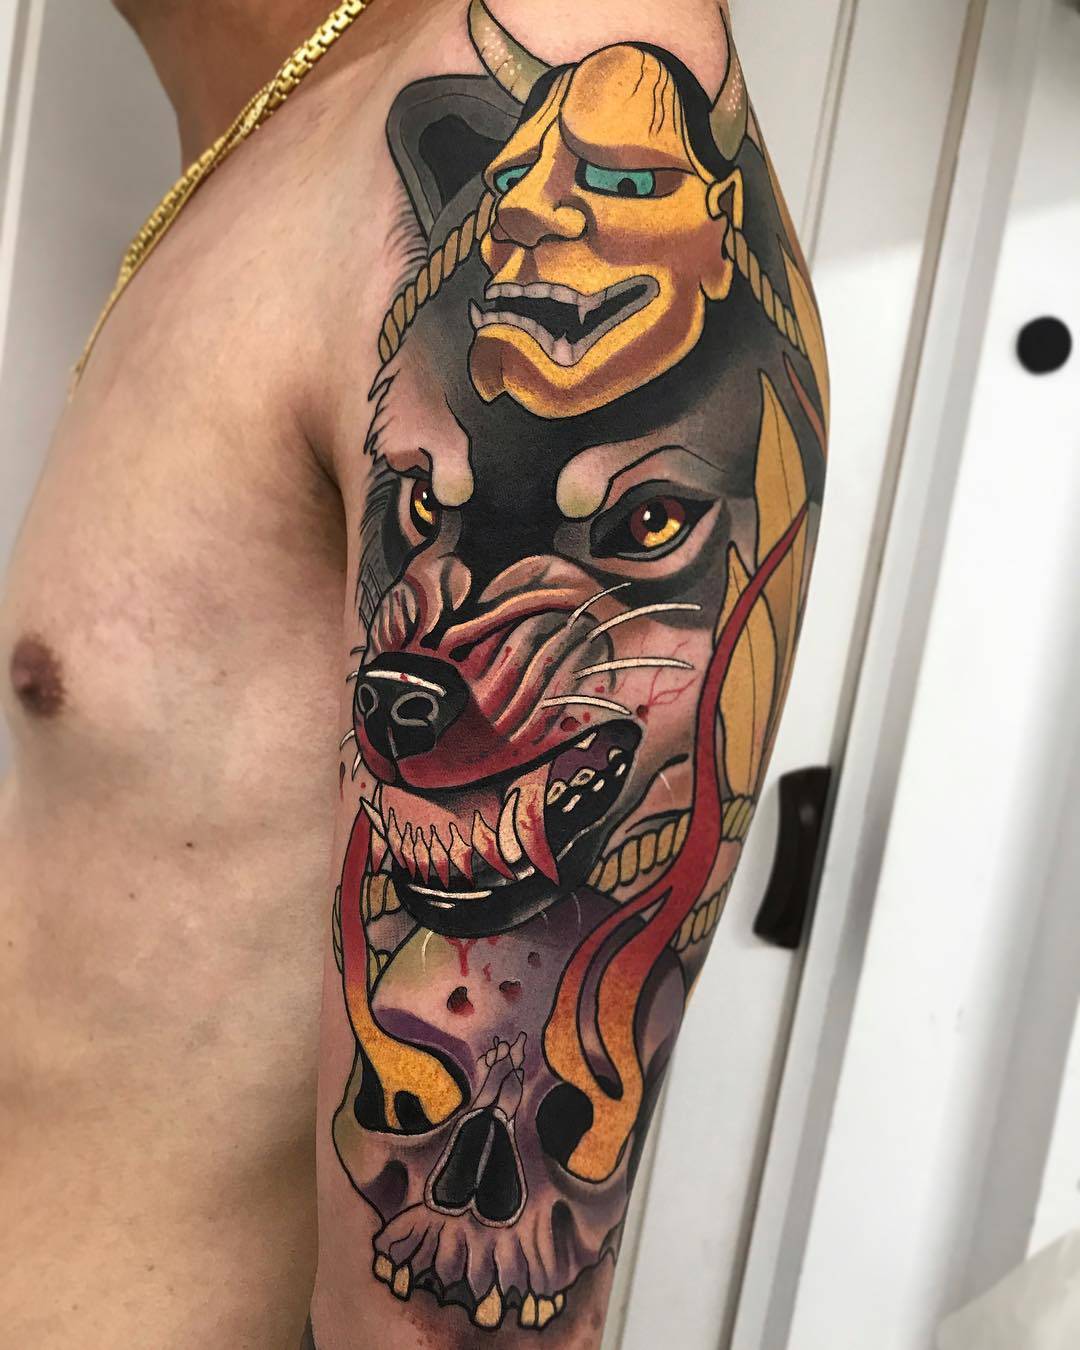 Roger Mares's neo traditional tattoo